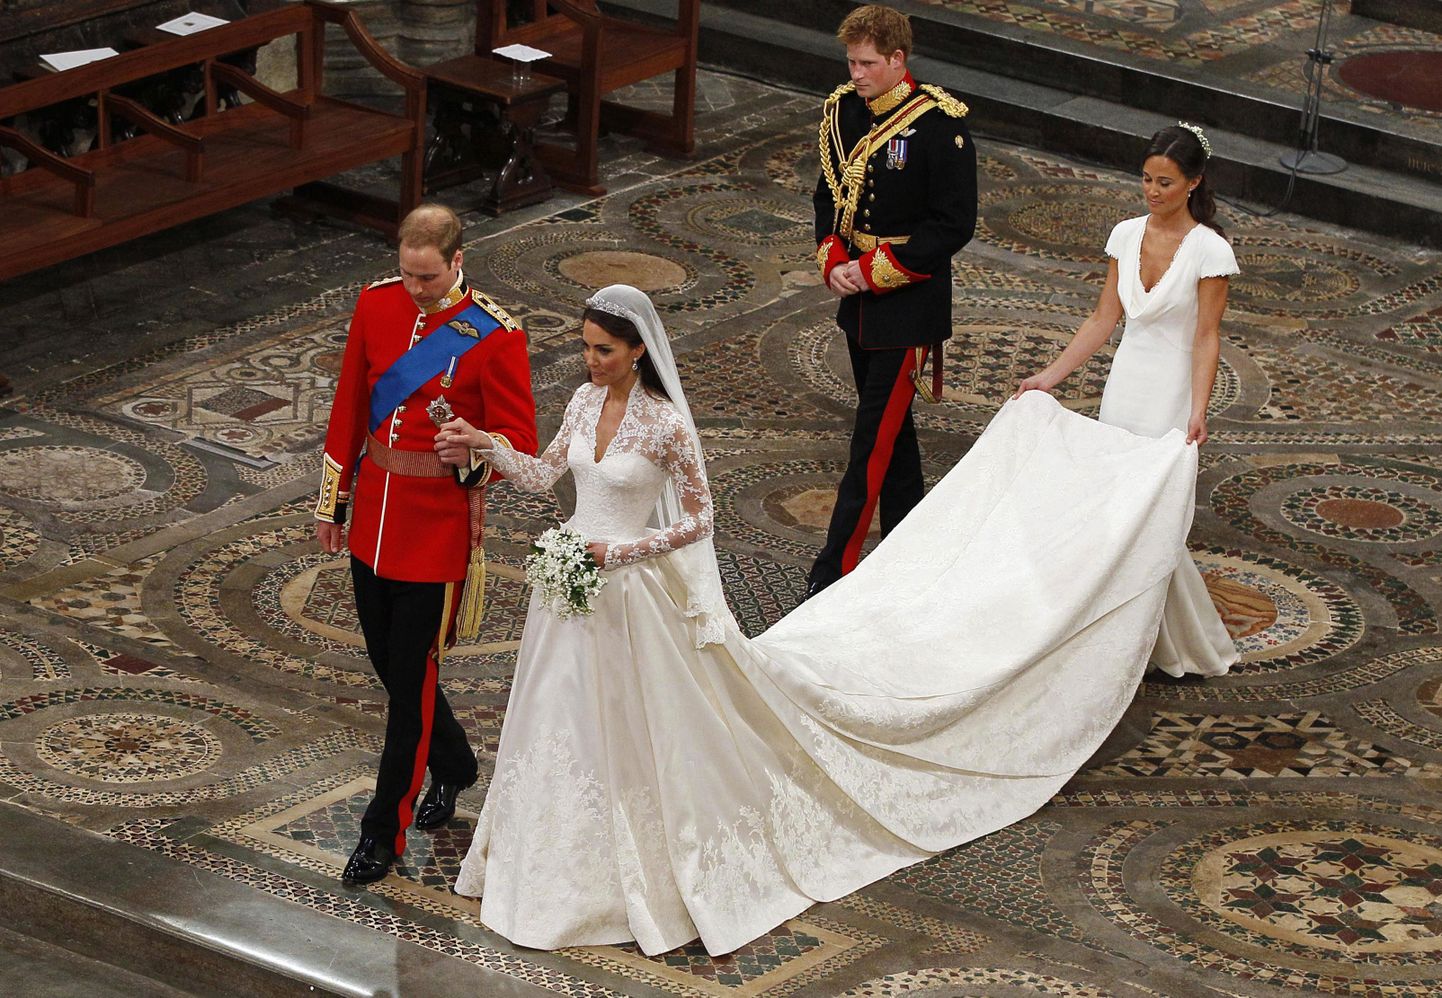 Britain's Prince William (L) and Catherine, Duchess of Cambridge, walk up the aisle followed by Prince Harry and Maid of Honour Pippa Middleton after their wedding ceremony in Westminster Abbey in central London in this April 29, 2011 file photo. Kate Middleton's wedding dress, created by Sarah Burton for the Alexander McQueen label and one of the most talked about outfits of the decade, will go on public display this summer at Buckingham Palace, officials said on June 6, 2011.       To match Reuters Life! BRITAIN-MIDDLETON/DRESS      REUTERS/Kirsty Wigglesworth/Pool/Files (BRITAIN - Tags: FASHION ROYALS)